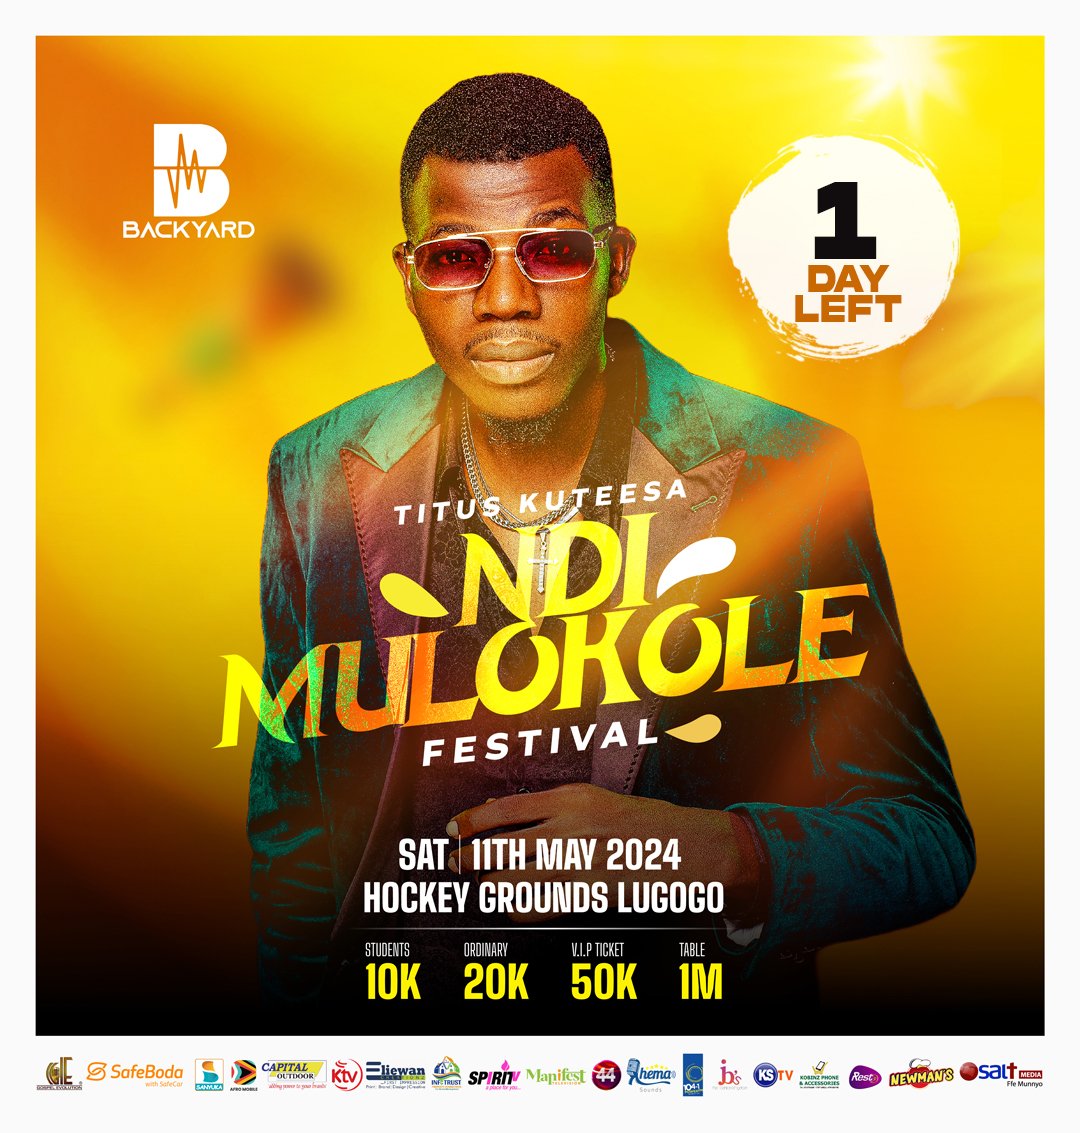 Only ONE DAY like this👆🏽

Checklist for the event:
-A ticket✅
-A fit✅
-Dancing shoes✅
-Lyrics to all his songs✅
-Company✅
How ready are you?

#NdiMulokoleFest24